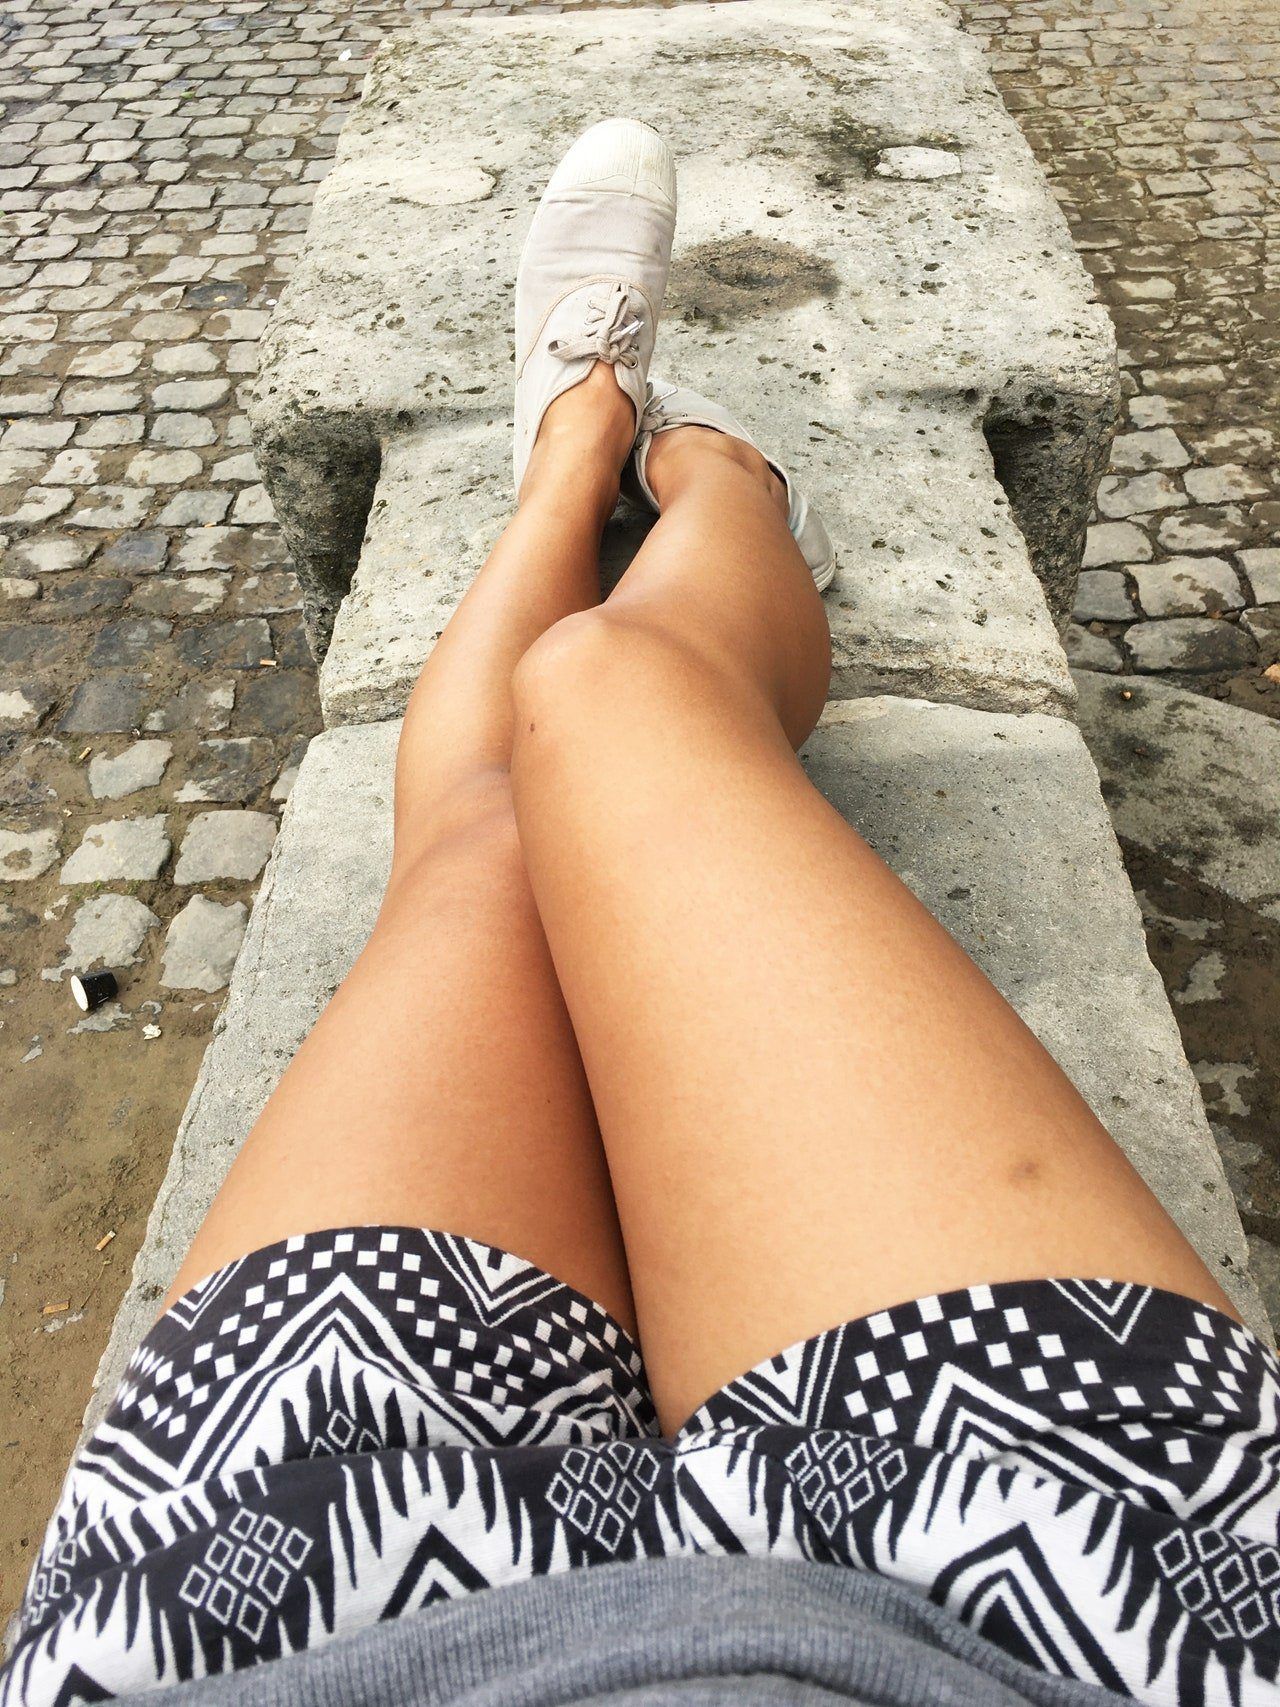 Shaved legs story